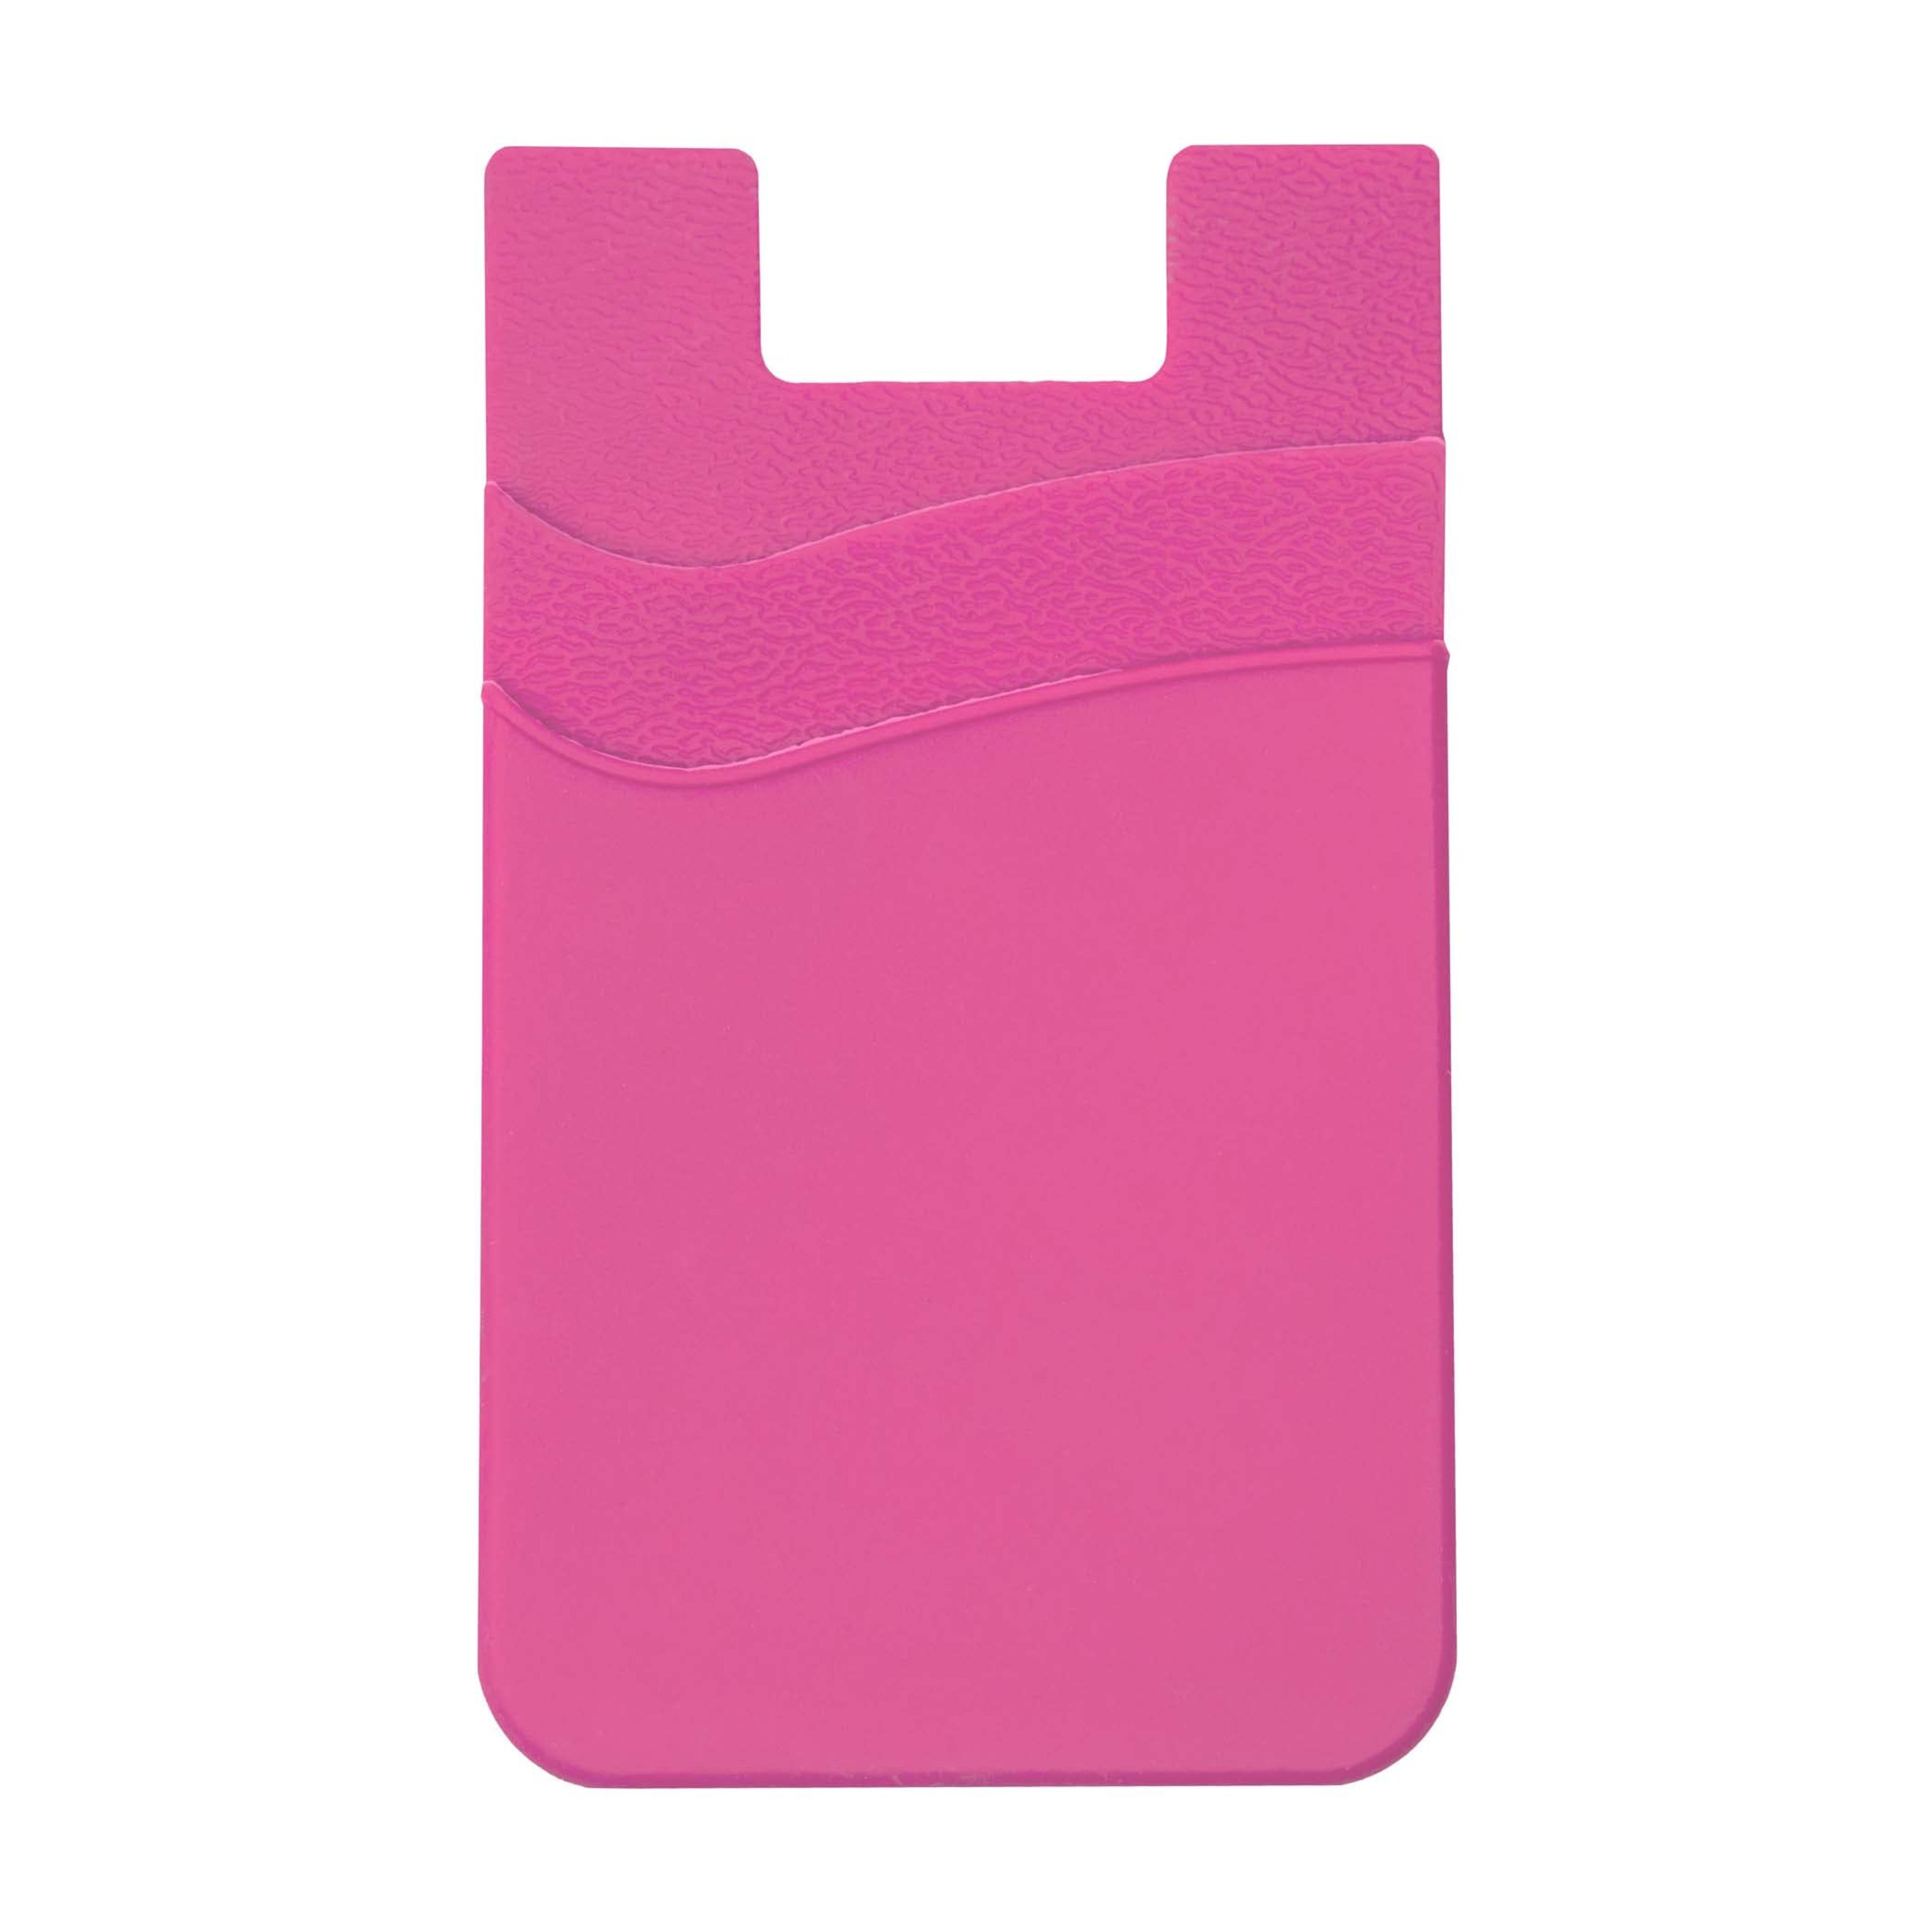 Silicone Phone Card Holder Double Slot Pocket, Stick On Wallet, Adhesive Credit Card Pouch, Compatible with iPhone & Samsung Galaxy - Light Pink